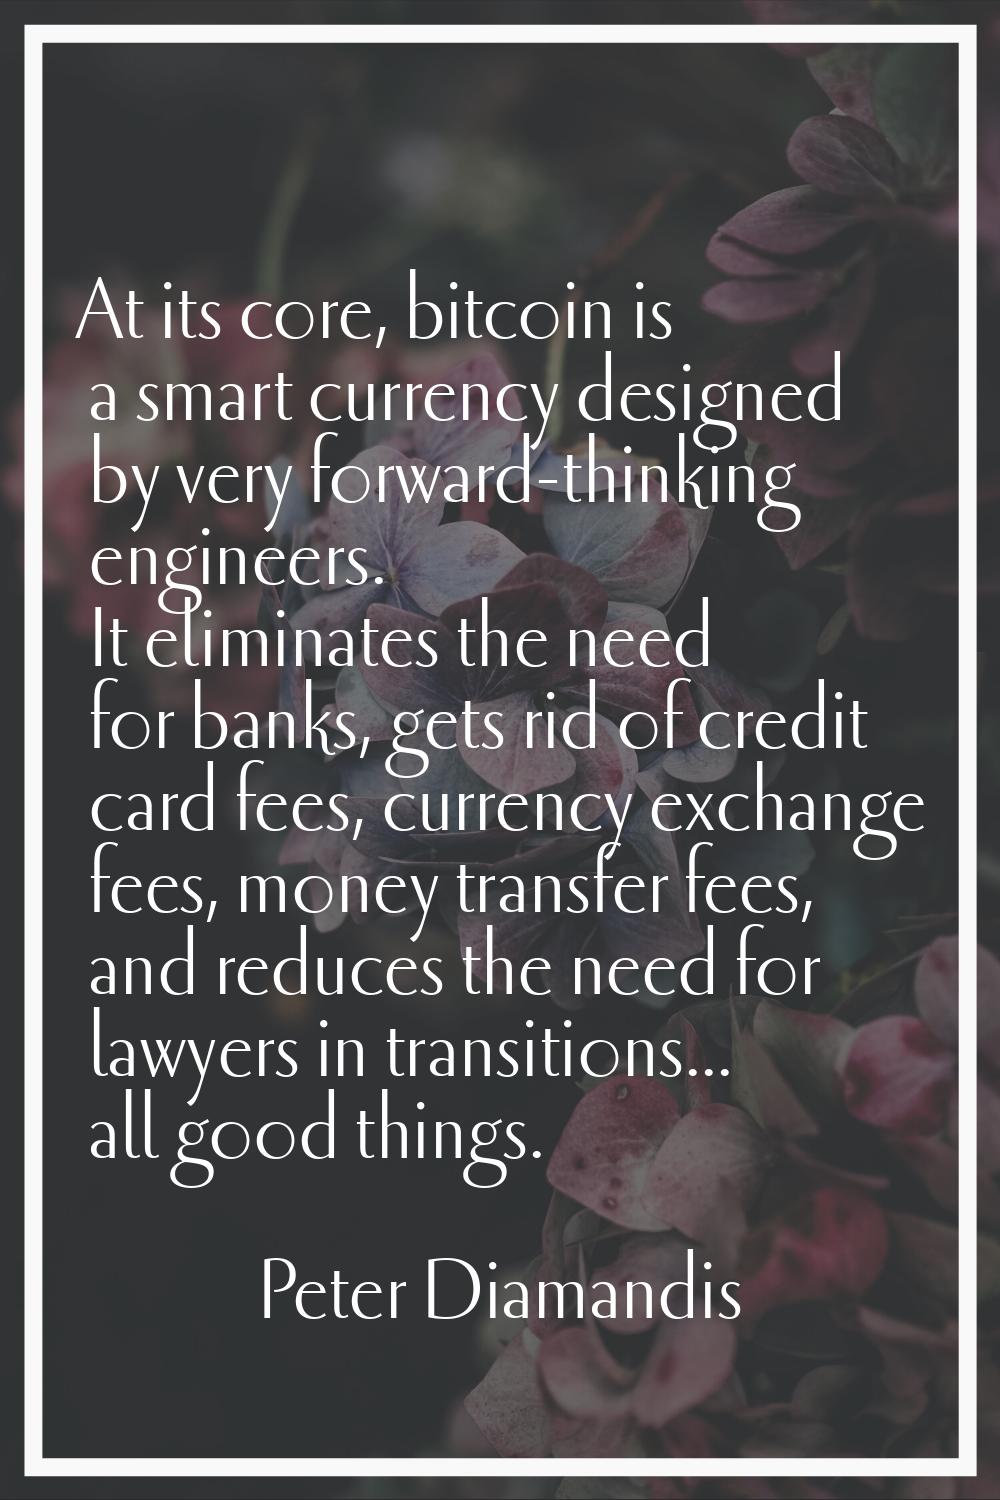 At its core, bitcoin is a smart currency designed by very forward-thinking engineers. It eliminates